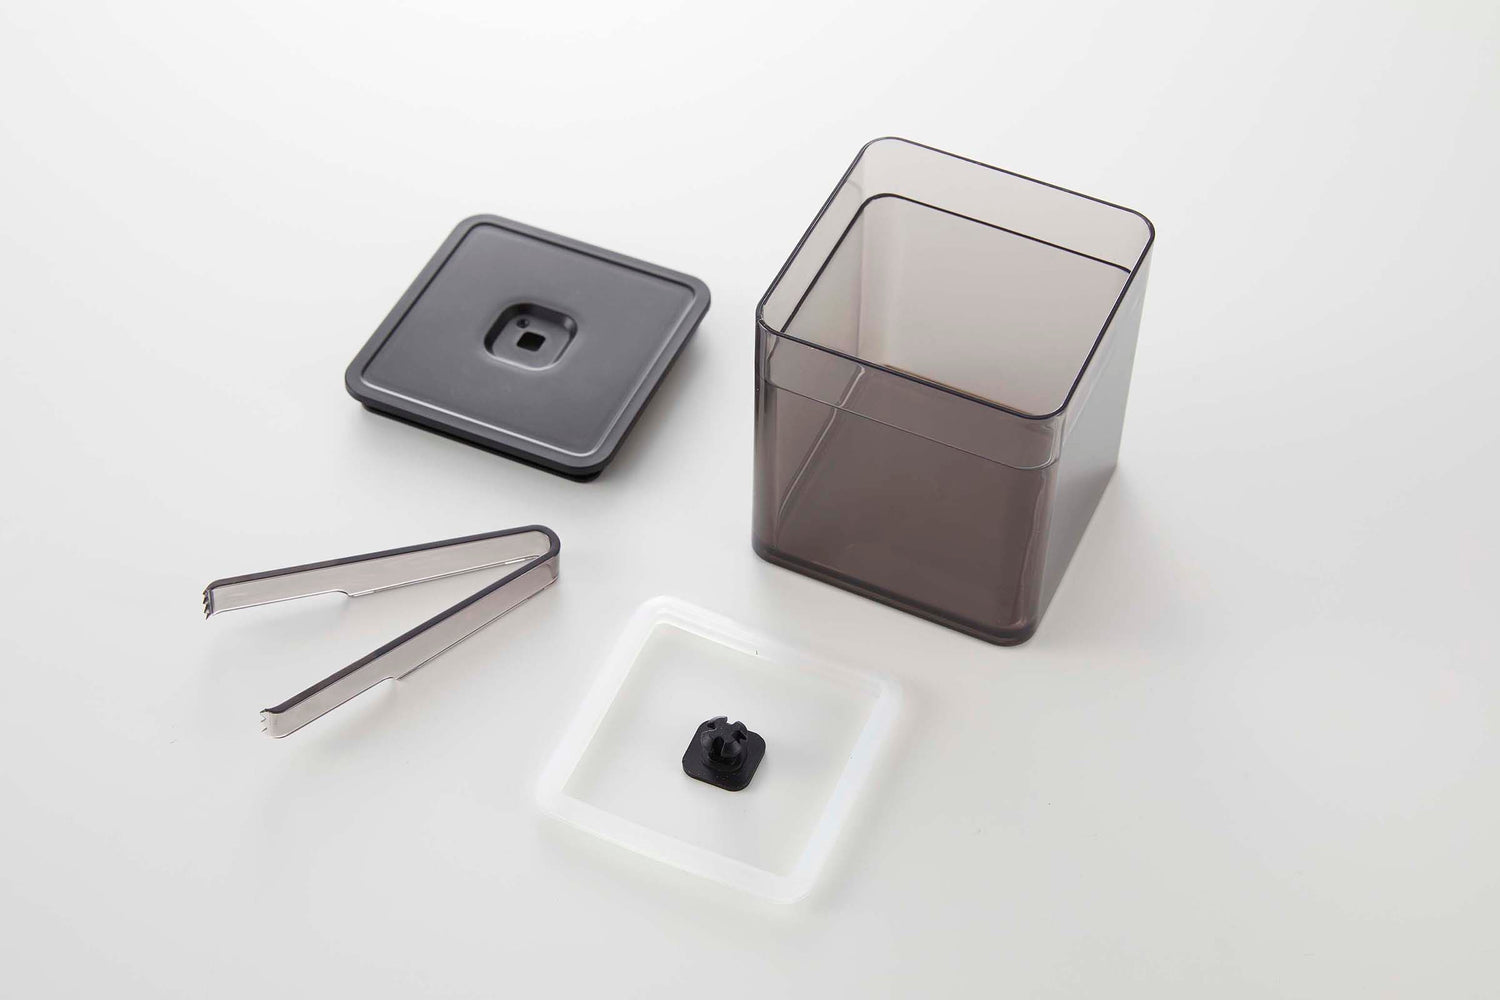 View 28 - Disassembled black Vacuum-Sealing Food Container w. Tongs on white background by Yamazaki Home.